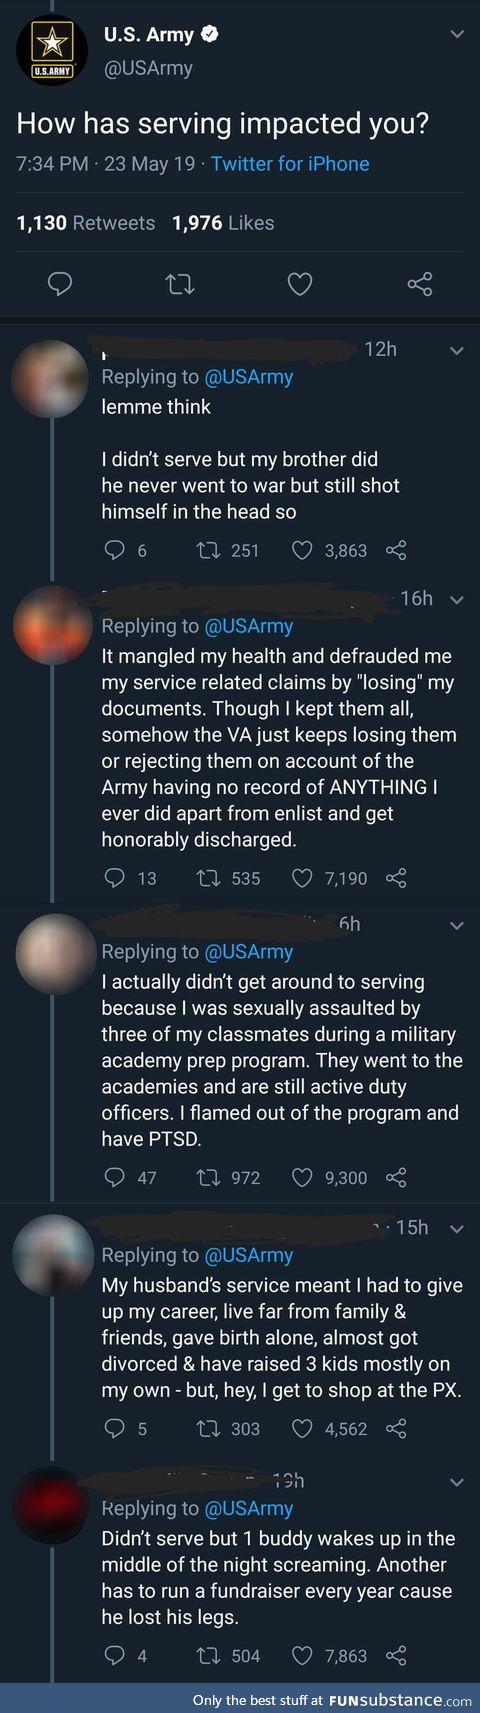 What could go wrong if we ask Twitter how the army was?